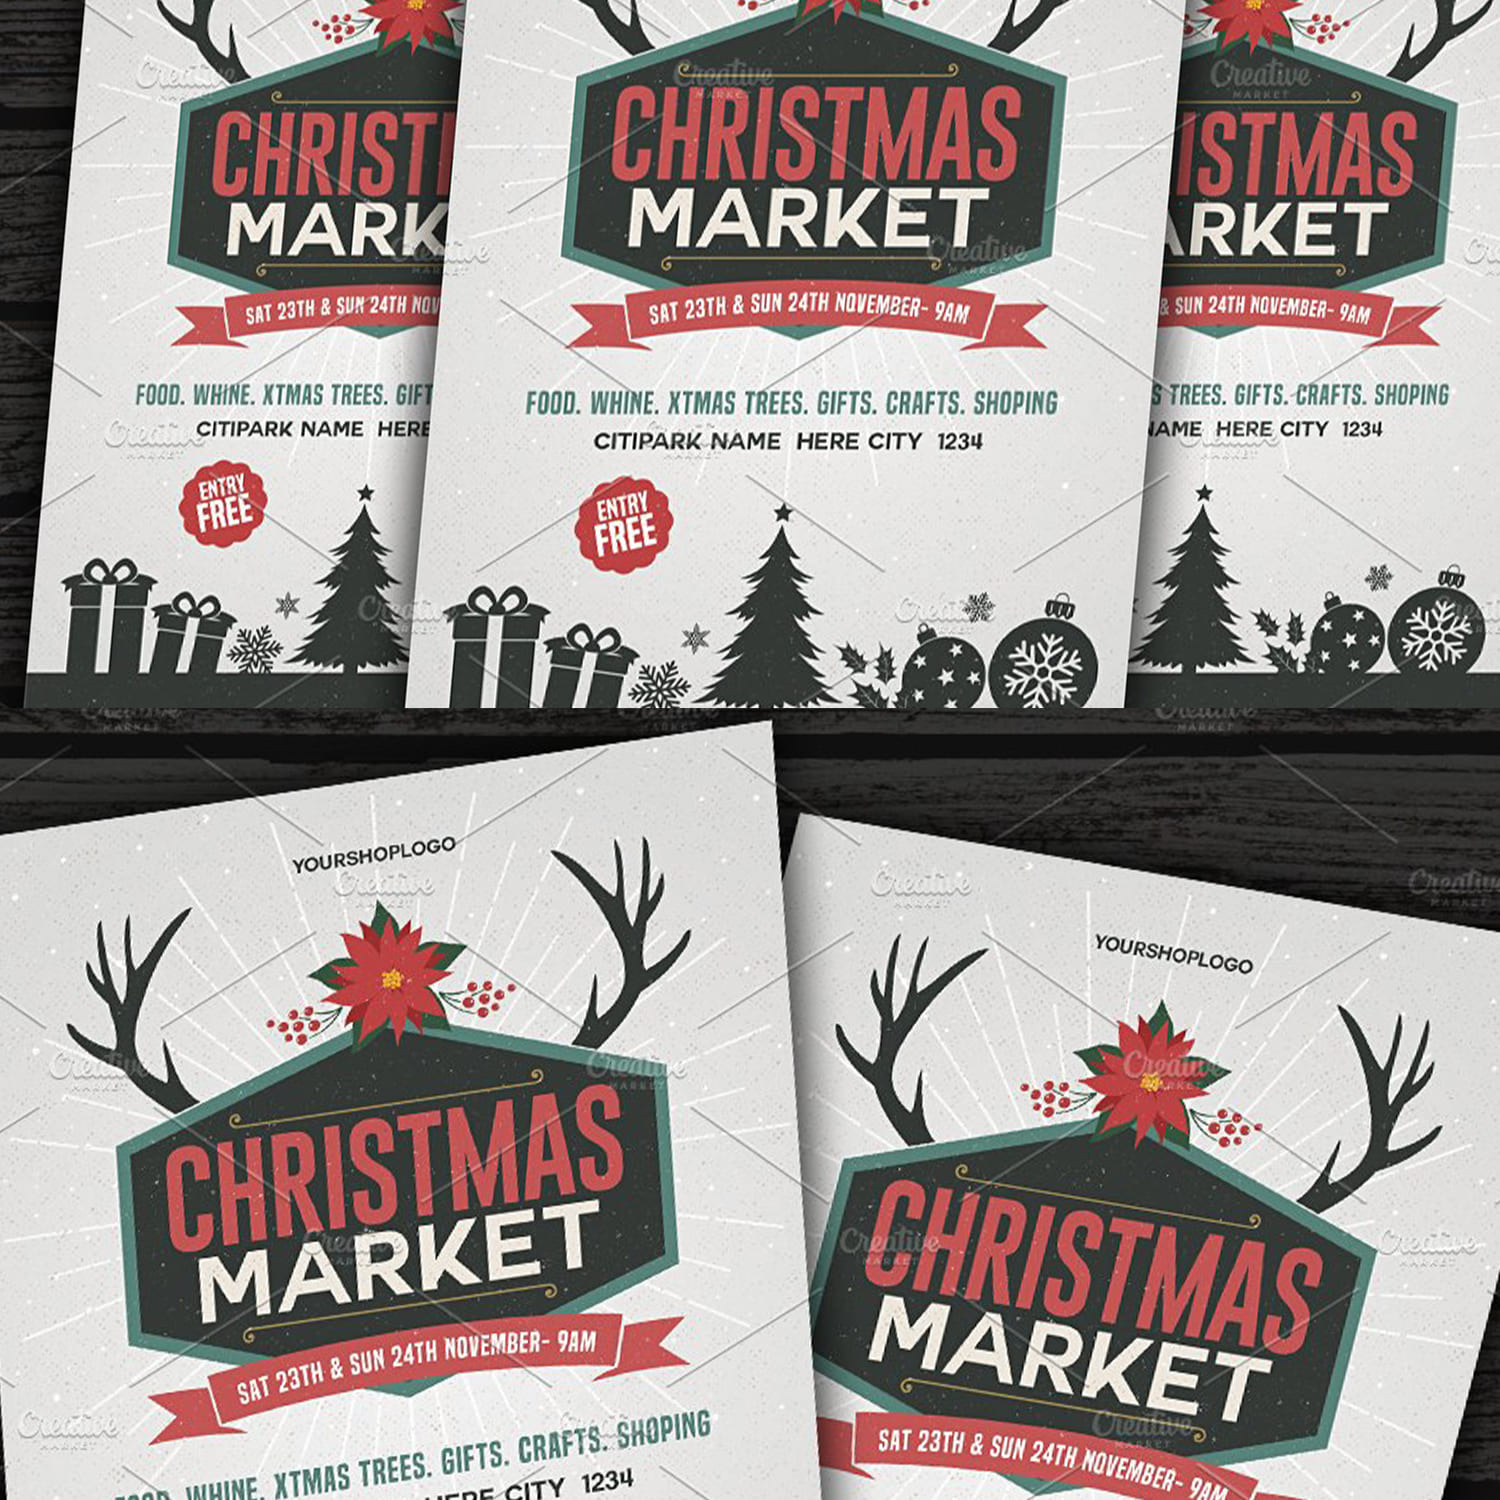 Christmas Market Flyer cover image.